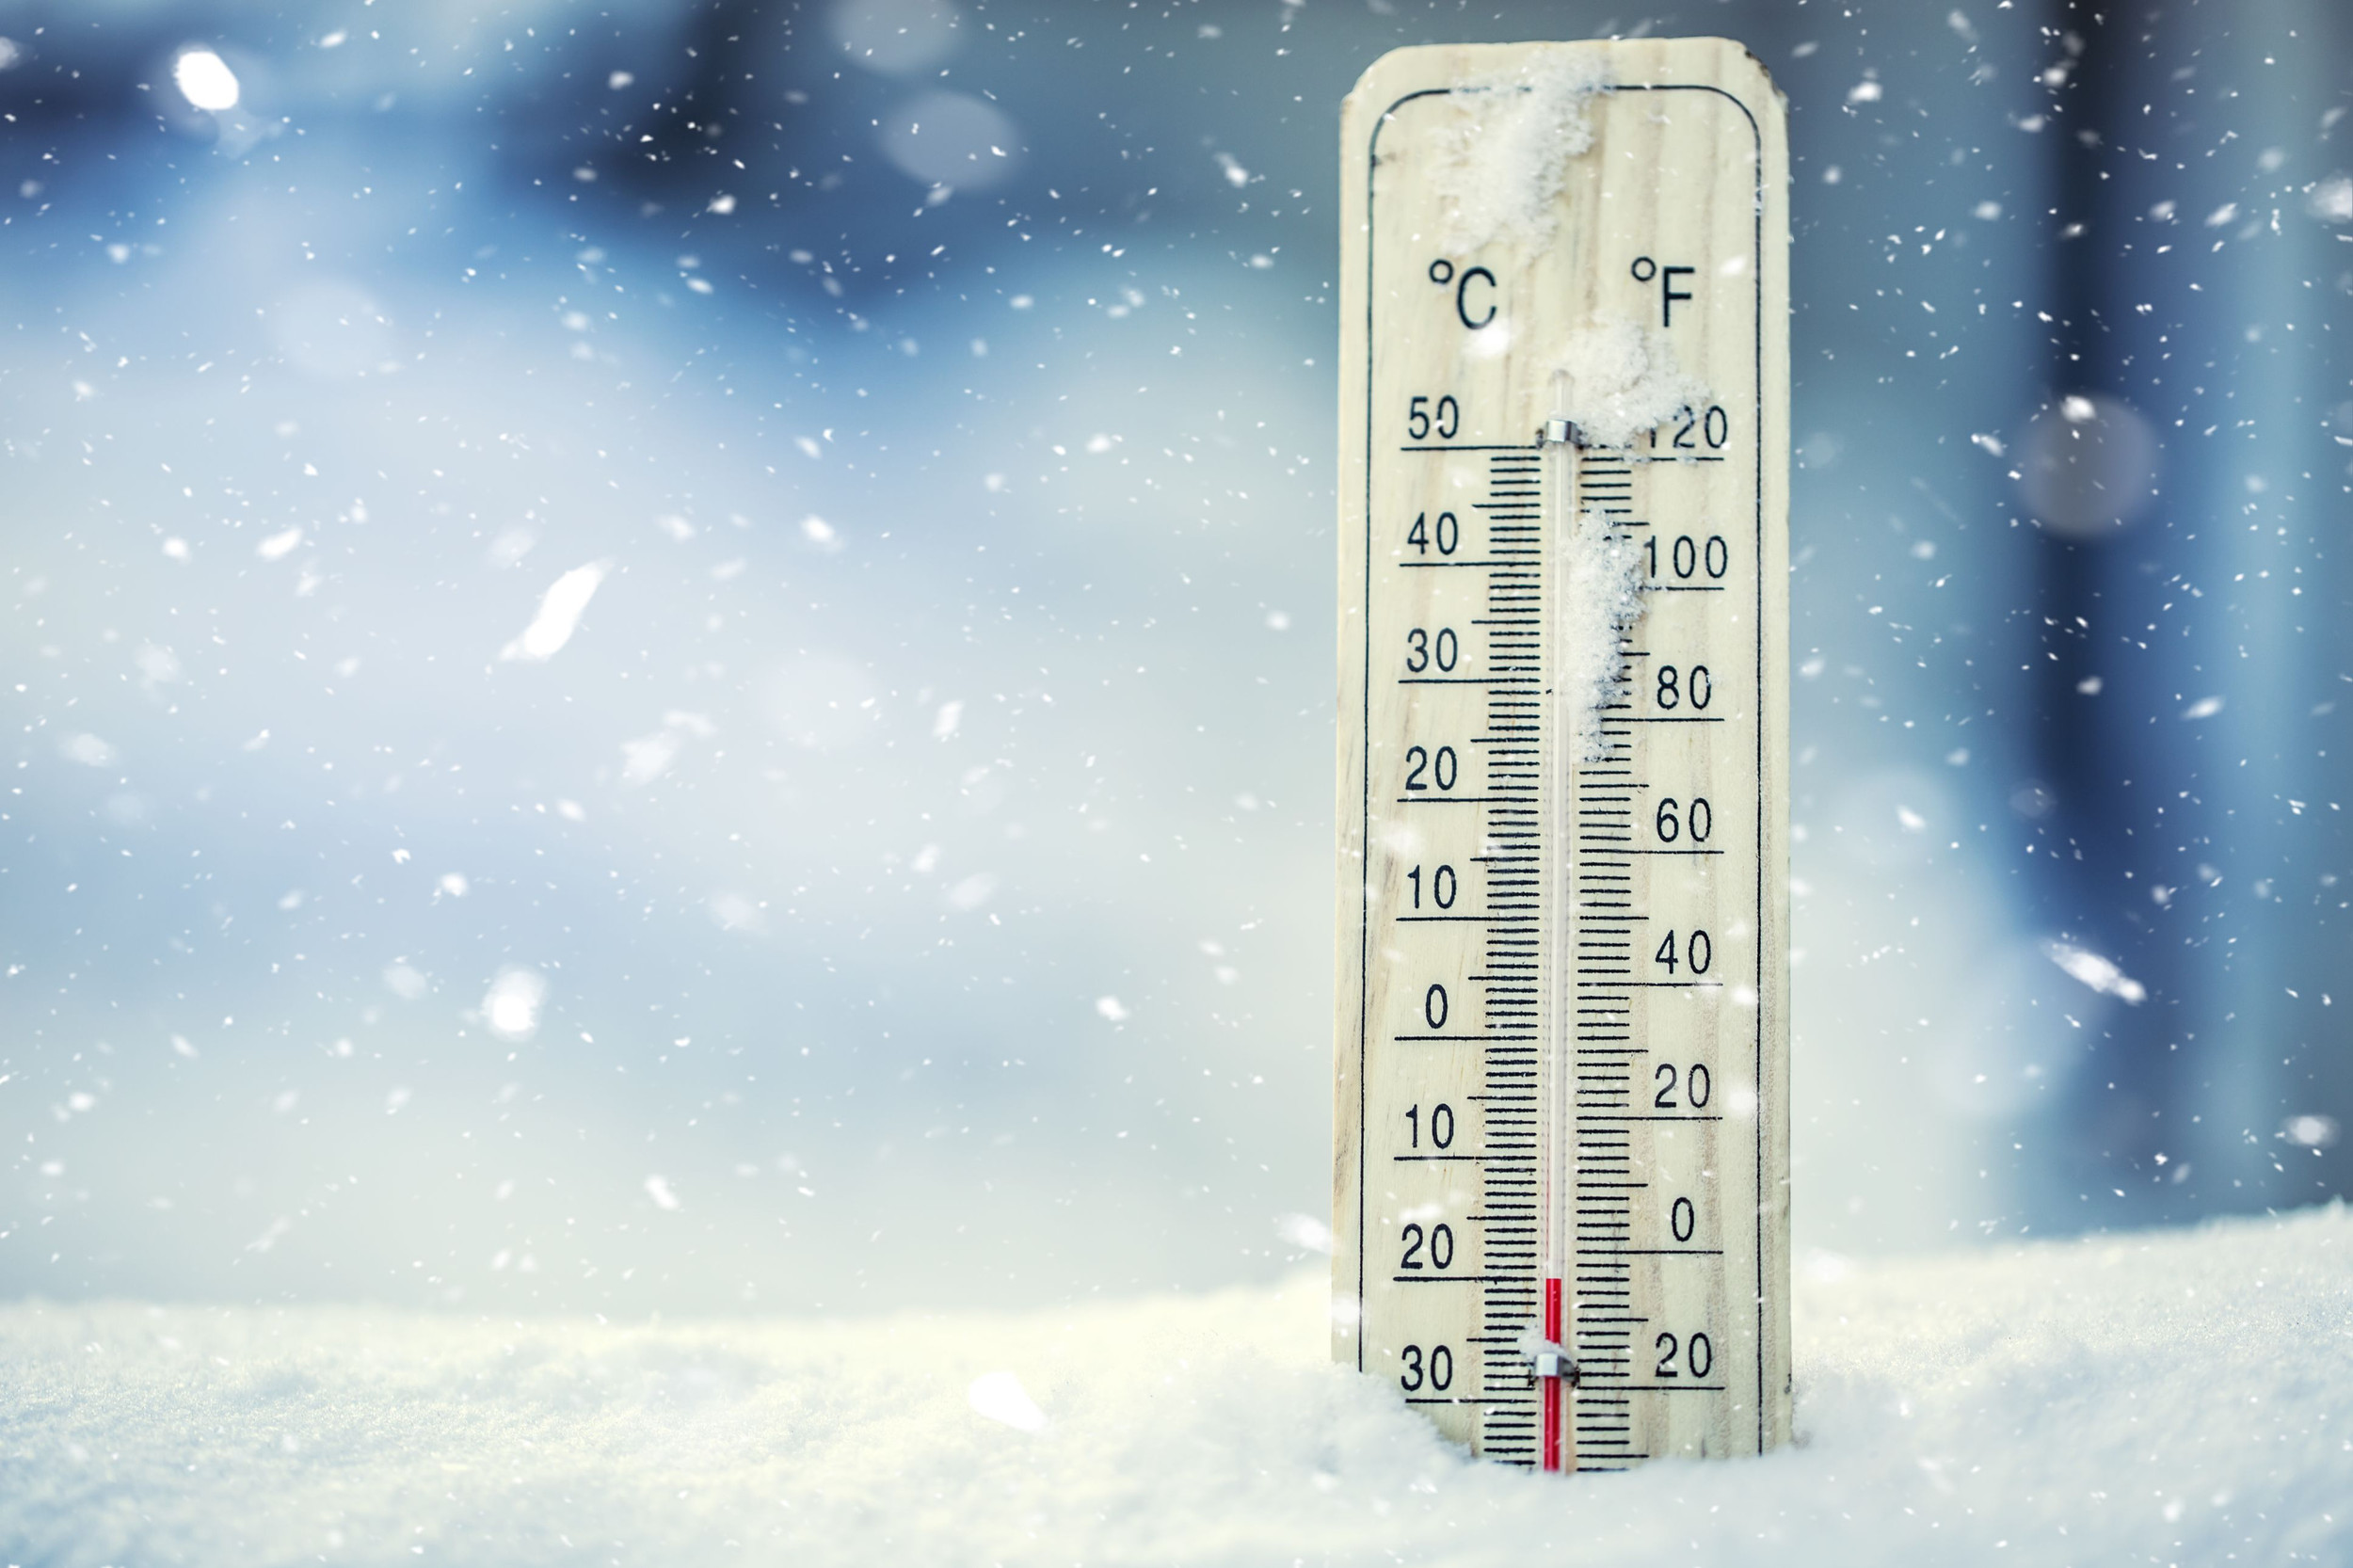 Thermometer on snow shows temperature drop below zero